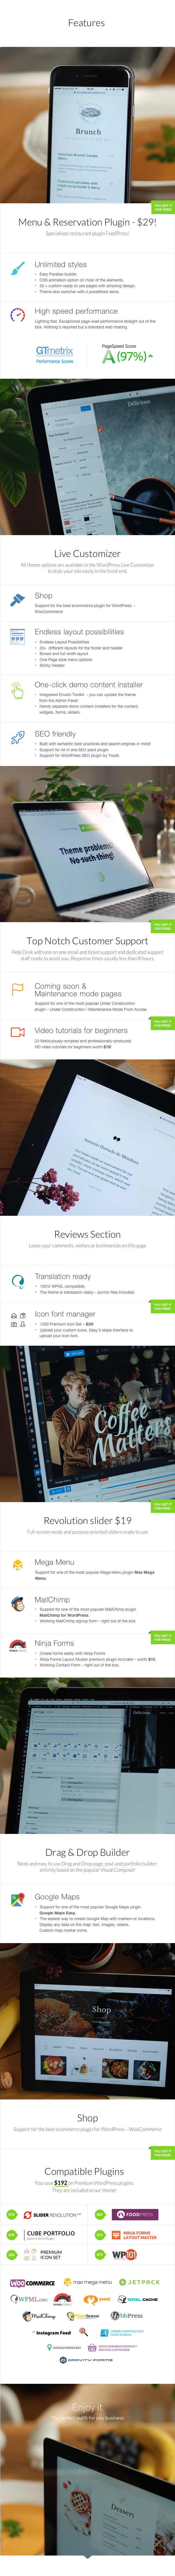 Image with a list of properties of the wordpress theme on the restaurant theme.